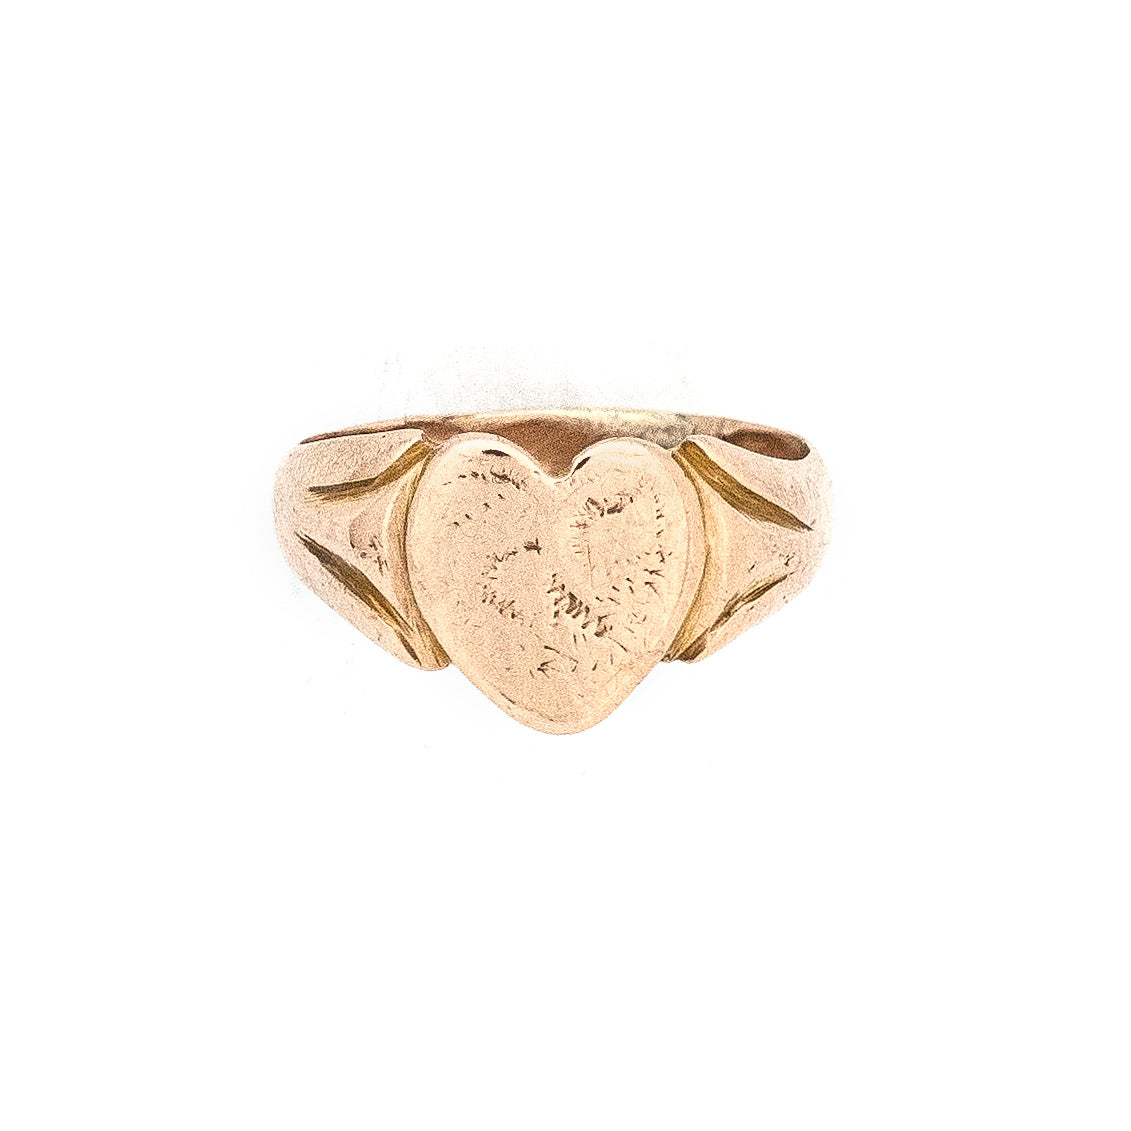 This warm, rosy-hued 12K gold signet ring features a large heart cradled by fluted shoulders. The heart once held a monogram, which has been buffed away, allowing space for a new monogram if desired.  Its wide band which makes it extra comfortable to wear -- it feels like love in a ring!  Front ring view